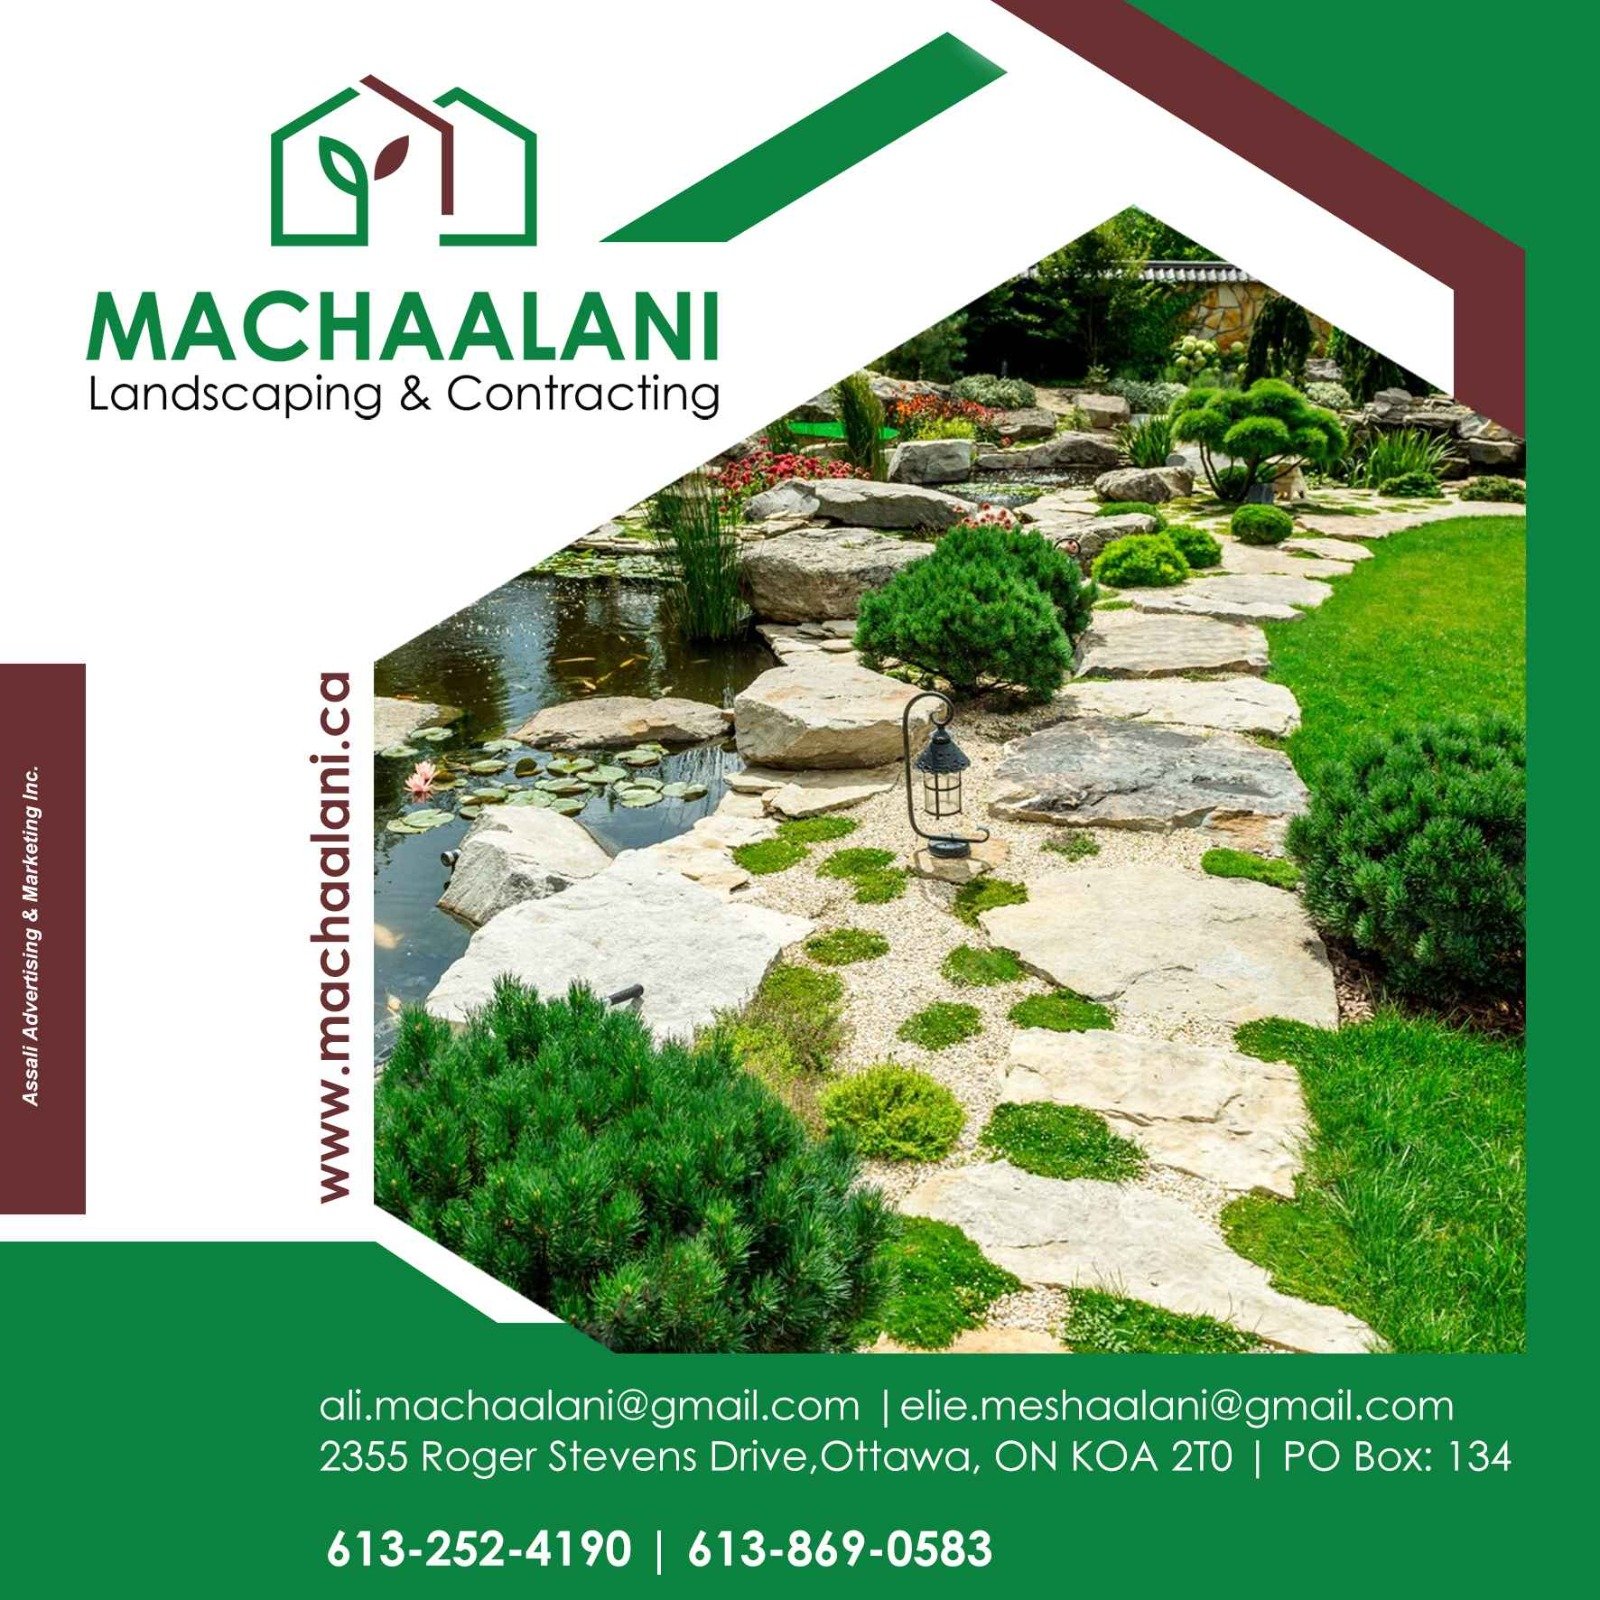 Machaalani Landscaping and Contracting